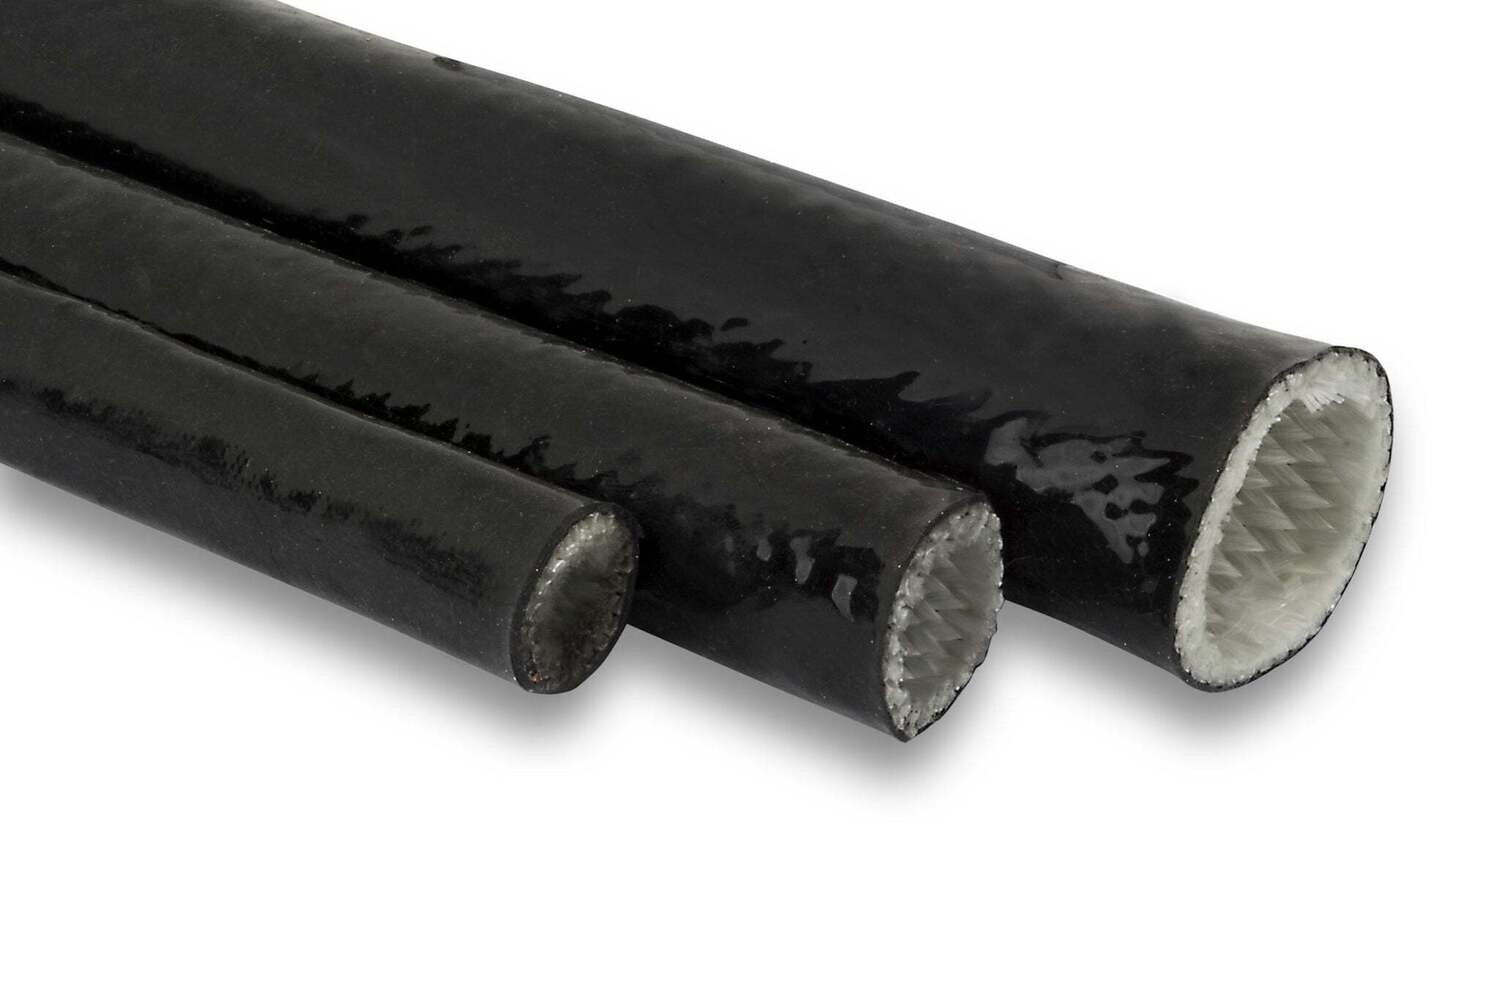 Black Silicon High Heat Sleeve - AN10 (Utilises 20mm Sleeving), 1.0m Multiple Qty will come on a continuous Roll